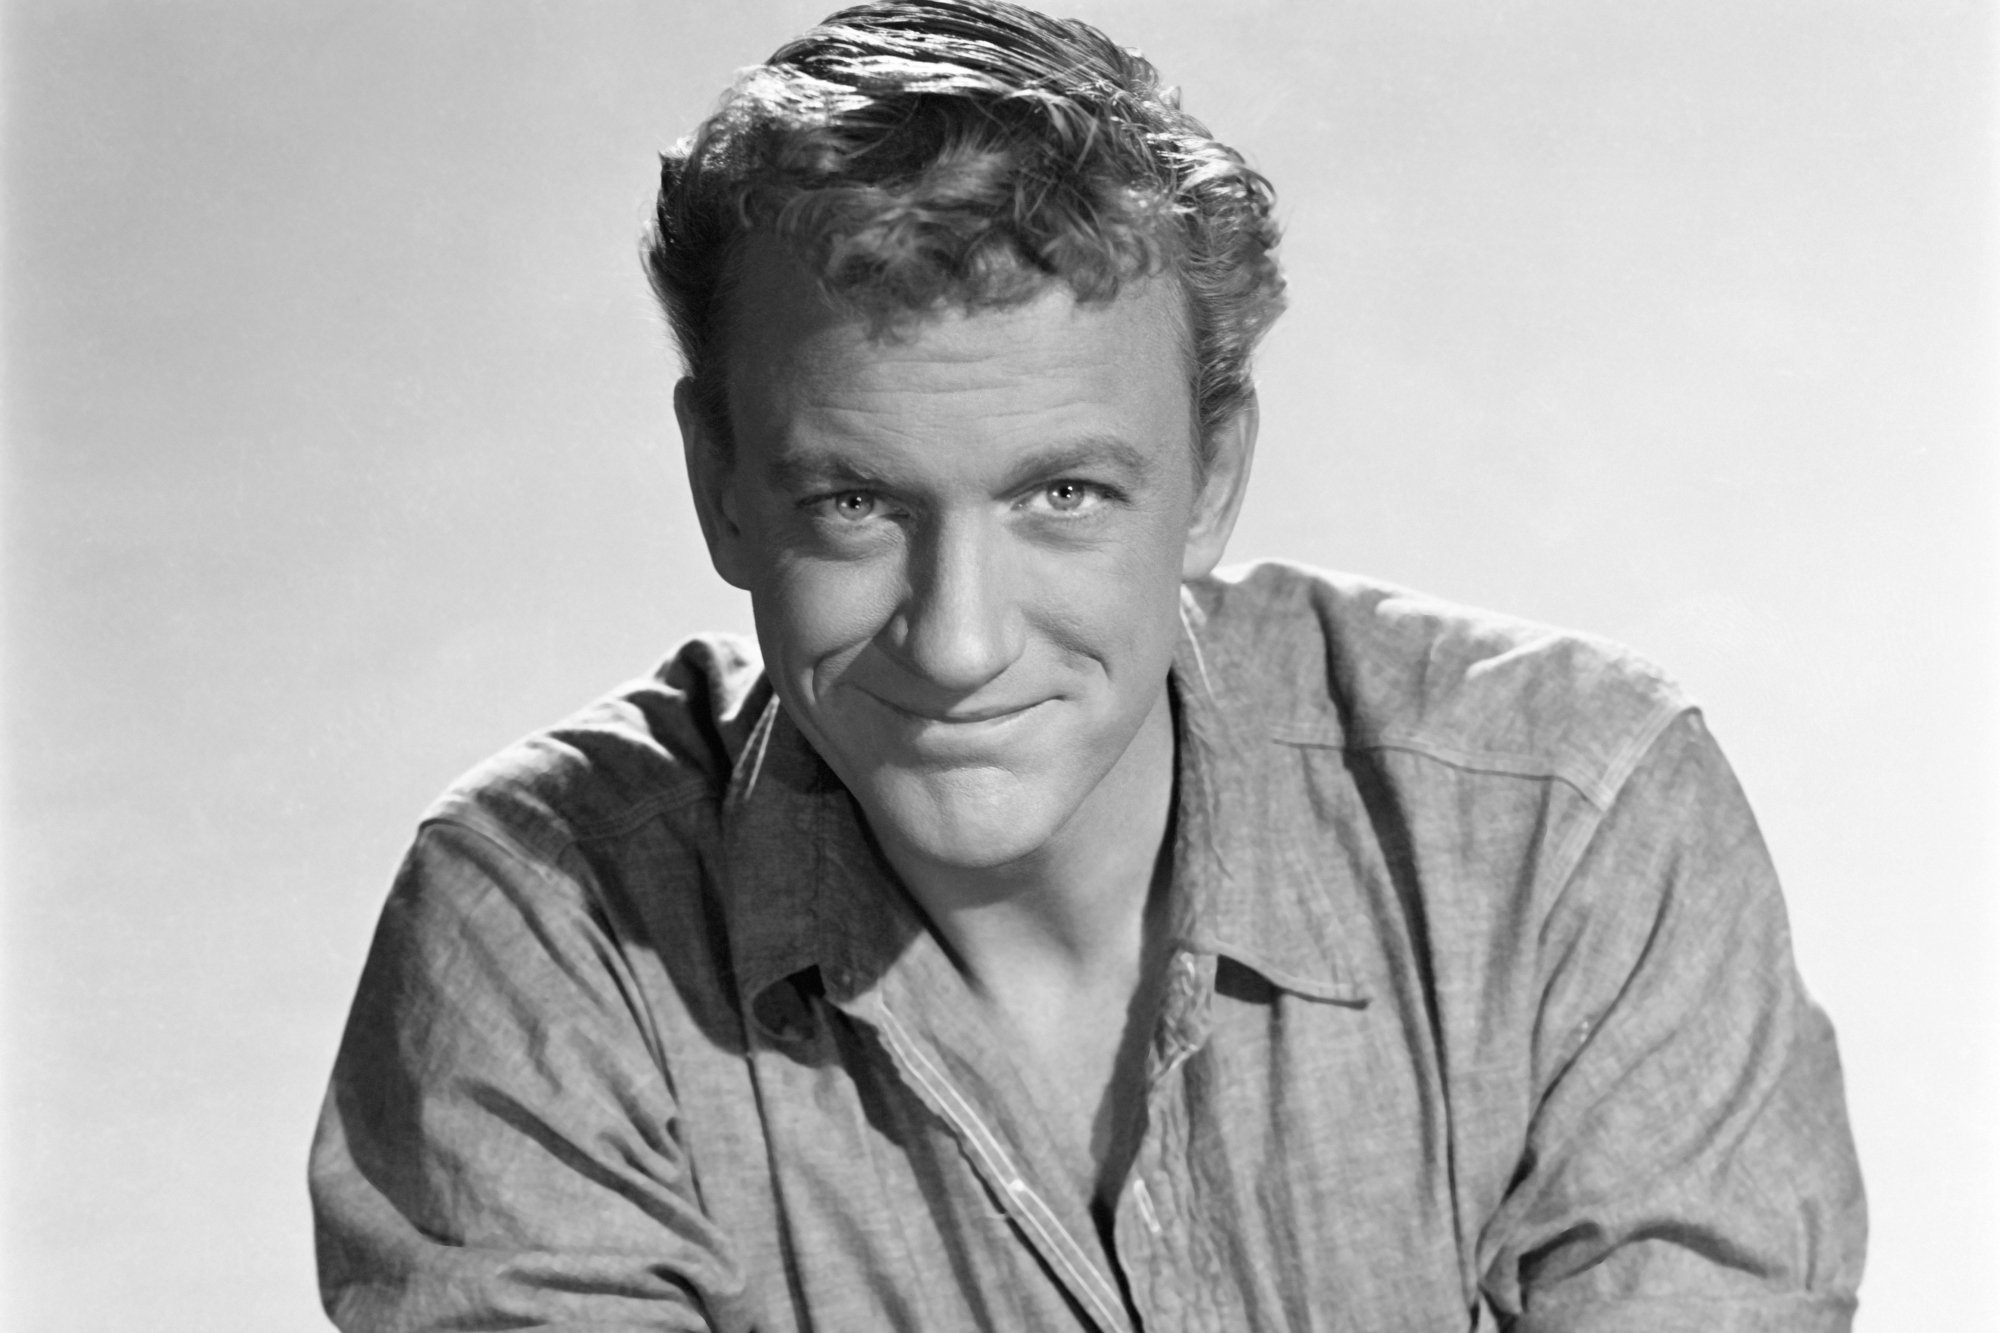 'Gunsmoke' actor James Arness, who represented Westerns before 'Deadwood' in a black-and-white publicity picture, smiling.